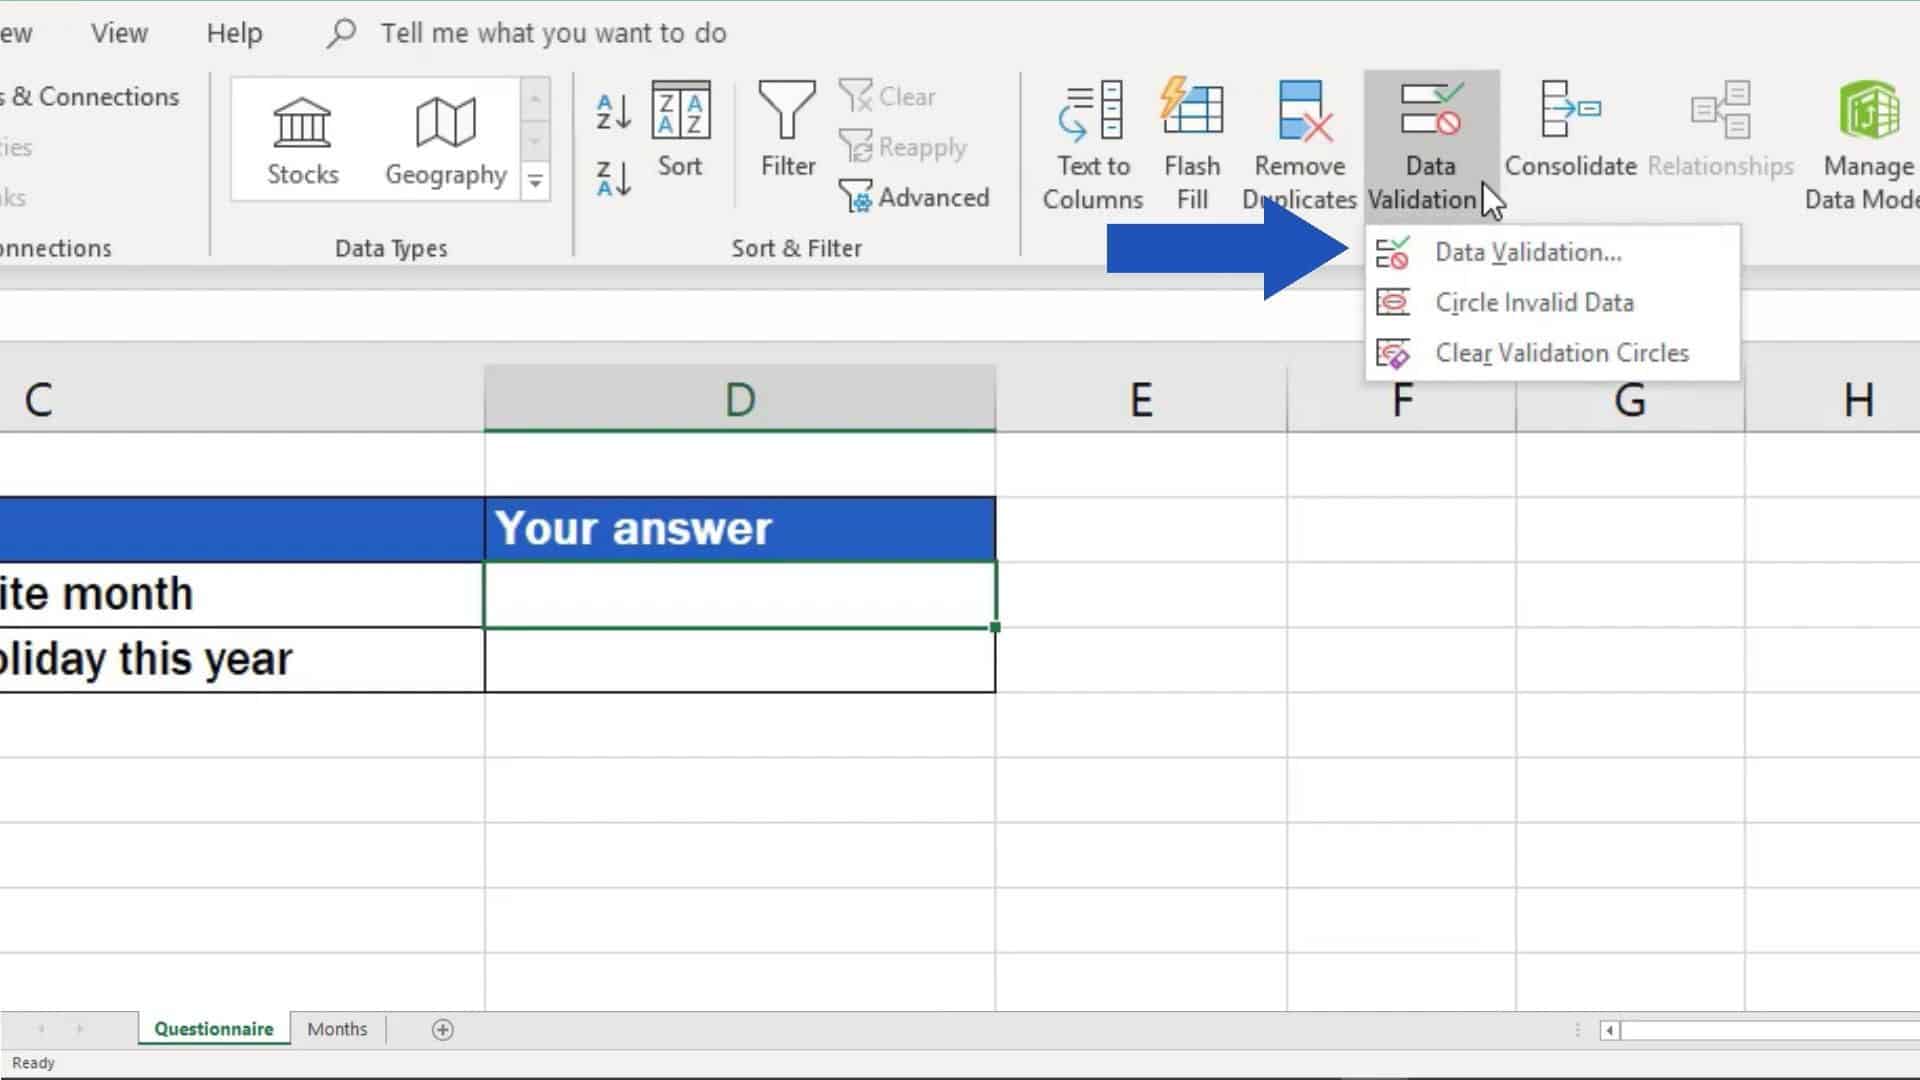 How to Create Drop-Down List in Excel